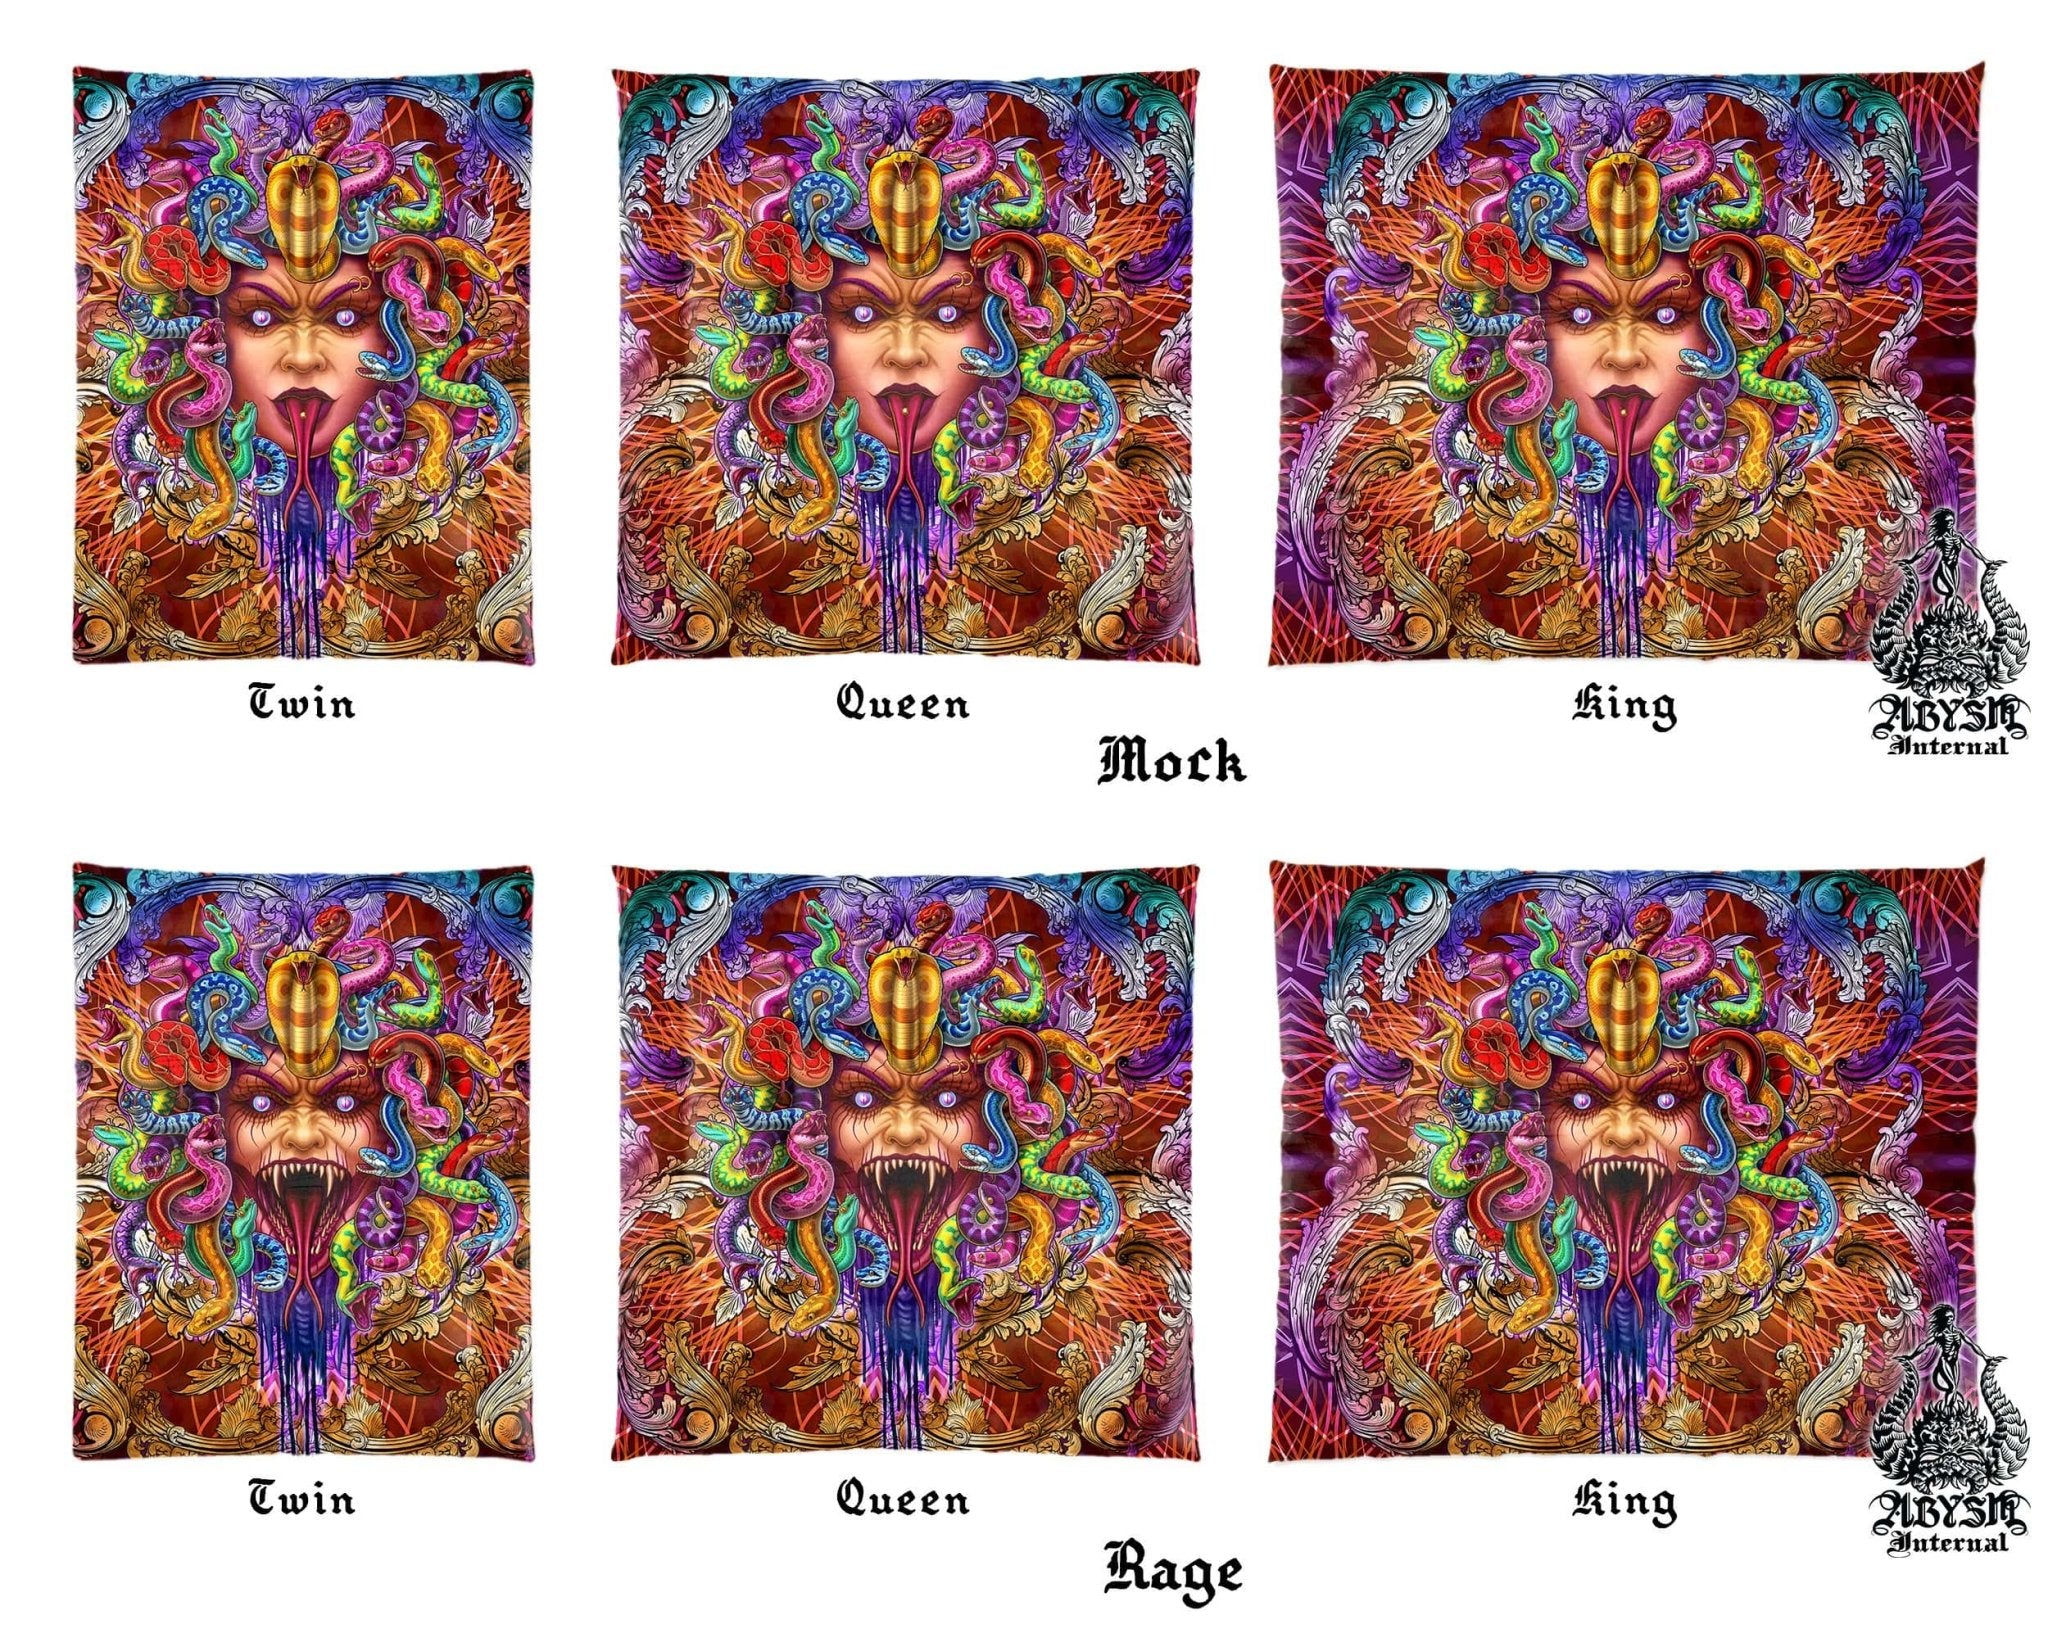 Psychedelic Bedding Set, Comforter and Duvet, Indie Bed Cover and Bedroom Decor, King, Queen and Twin Size - Medusa, 2 Faces - Abysm Internal